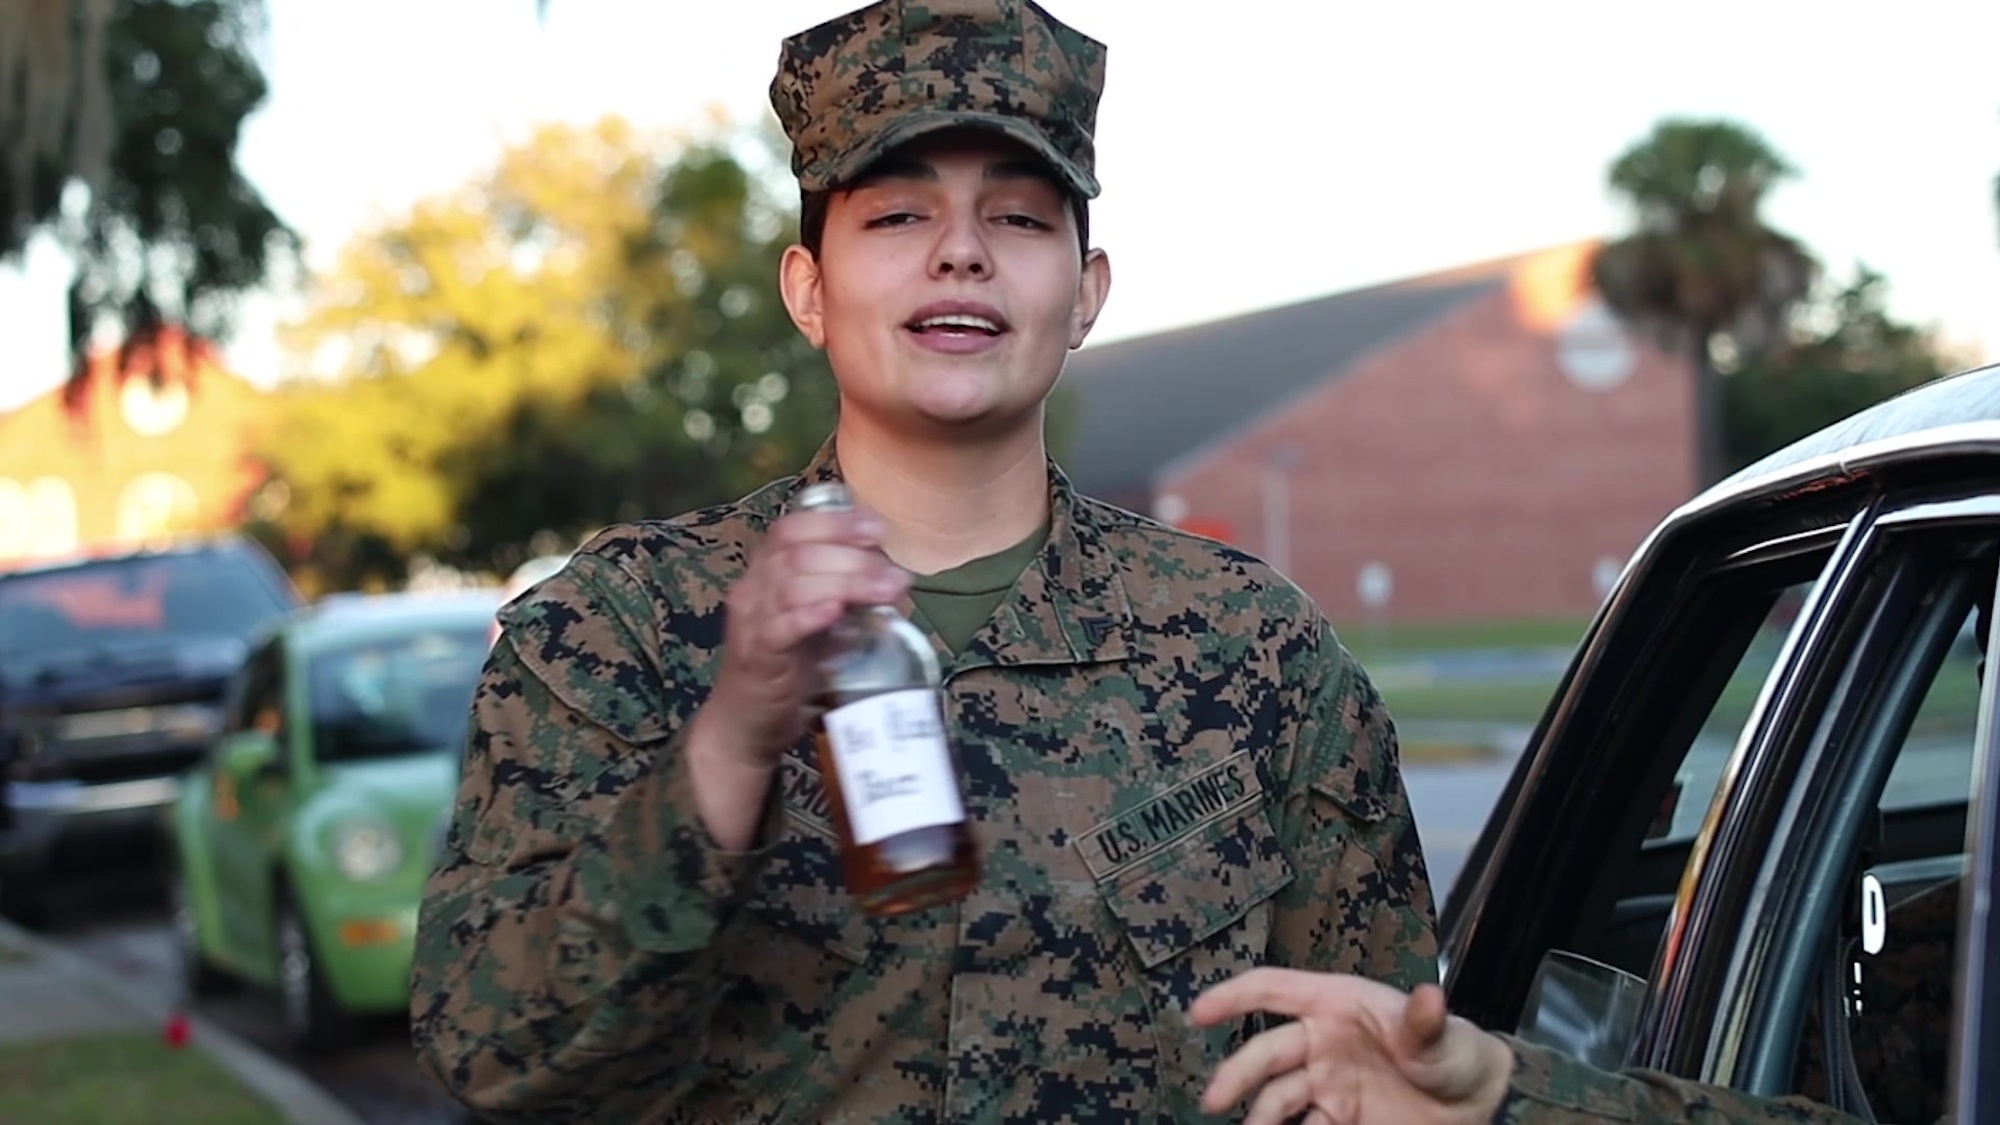 Marine Corps Recruit Depot Parris Island's safety video for the 2020 Thanksgiving holiday weekend.